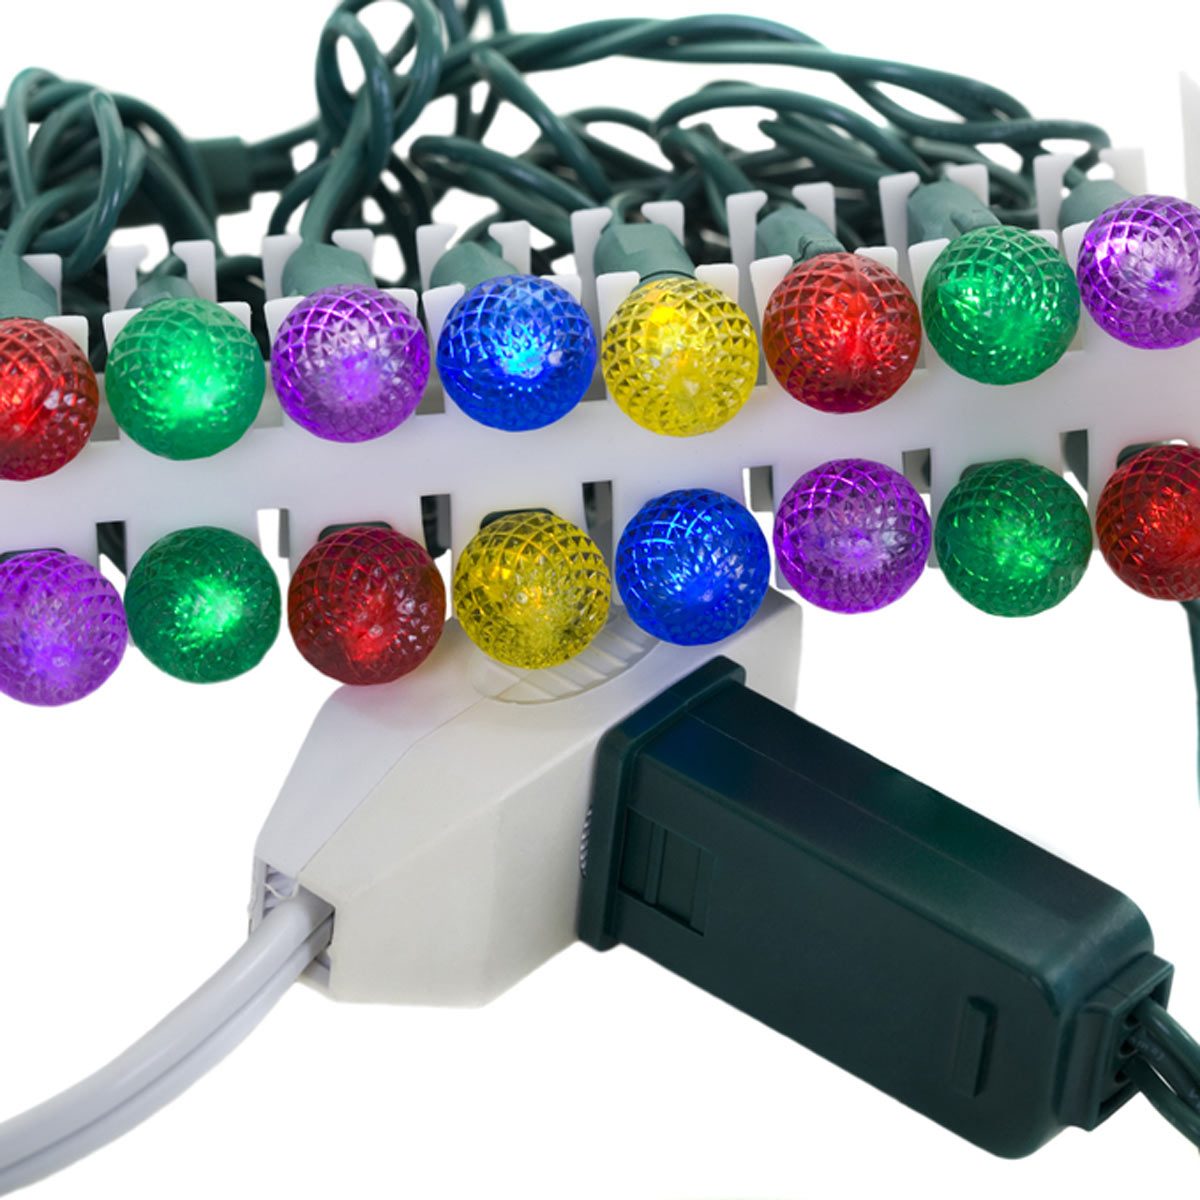 Energy-efficient Christmas lights? Switch to LED